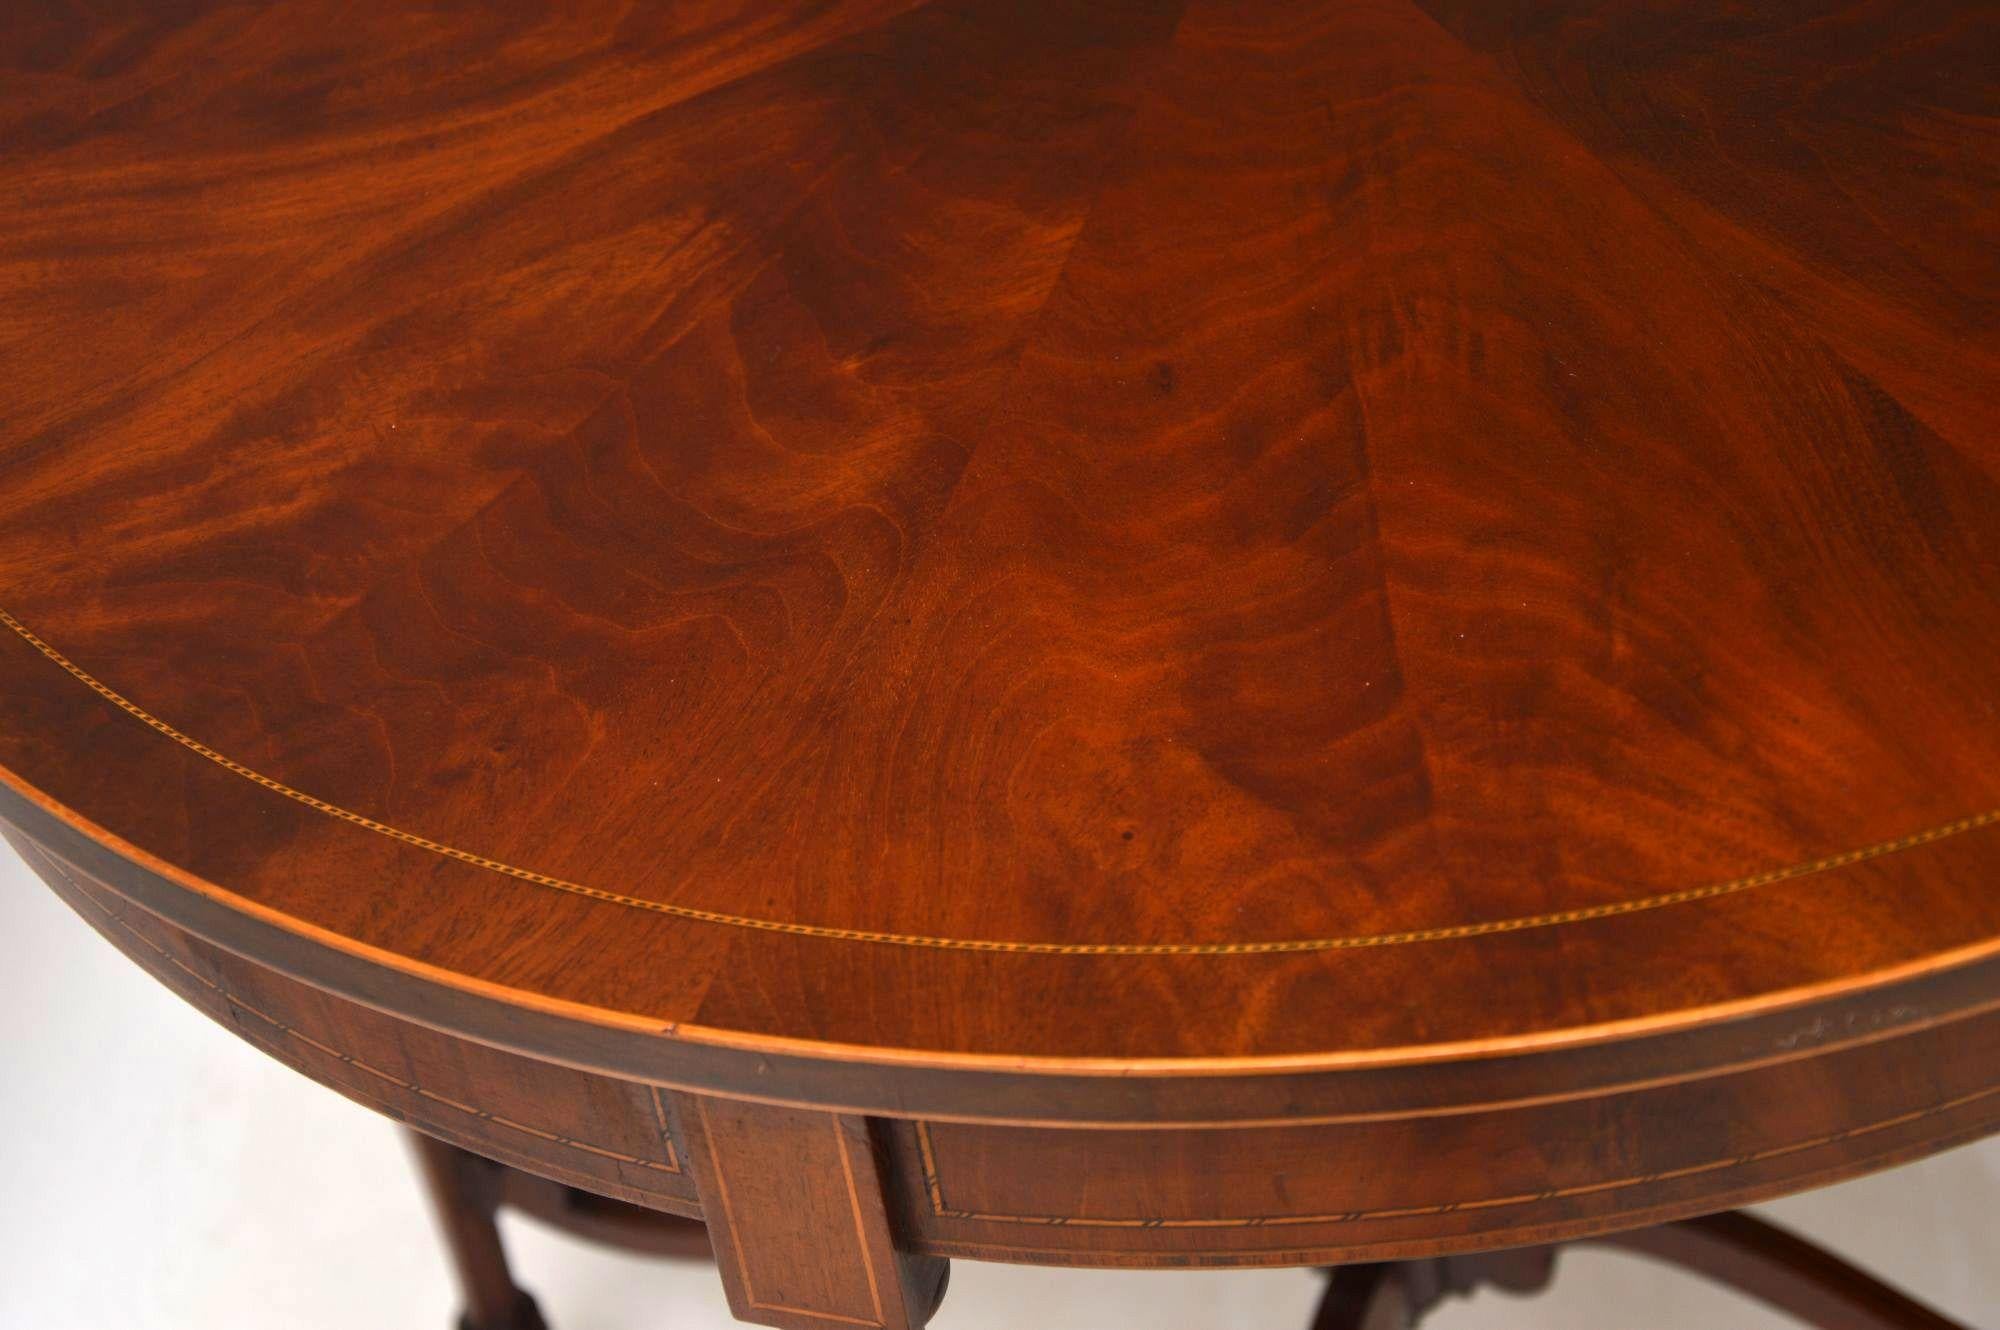 Early 20th Century Antique Edwardian Inlaid Mahogany Occasional Table